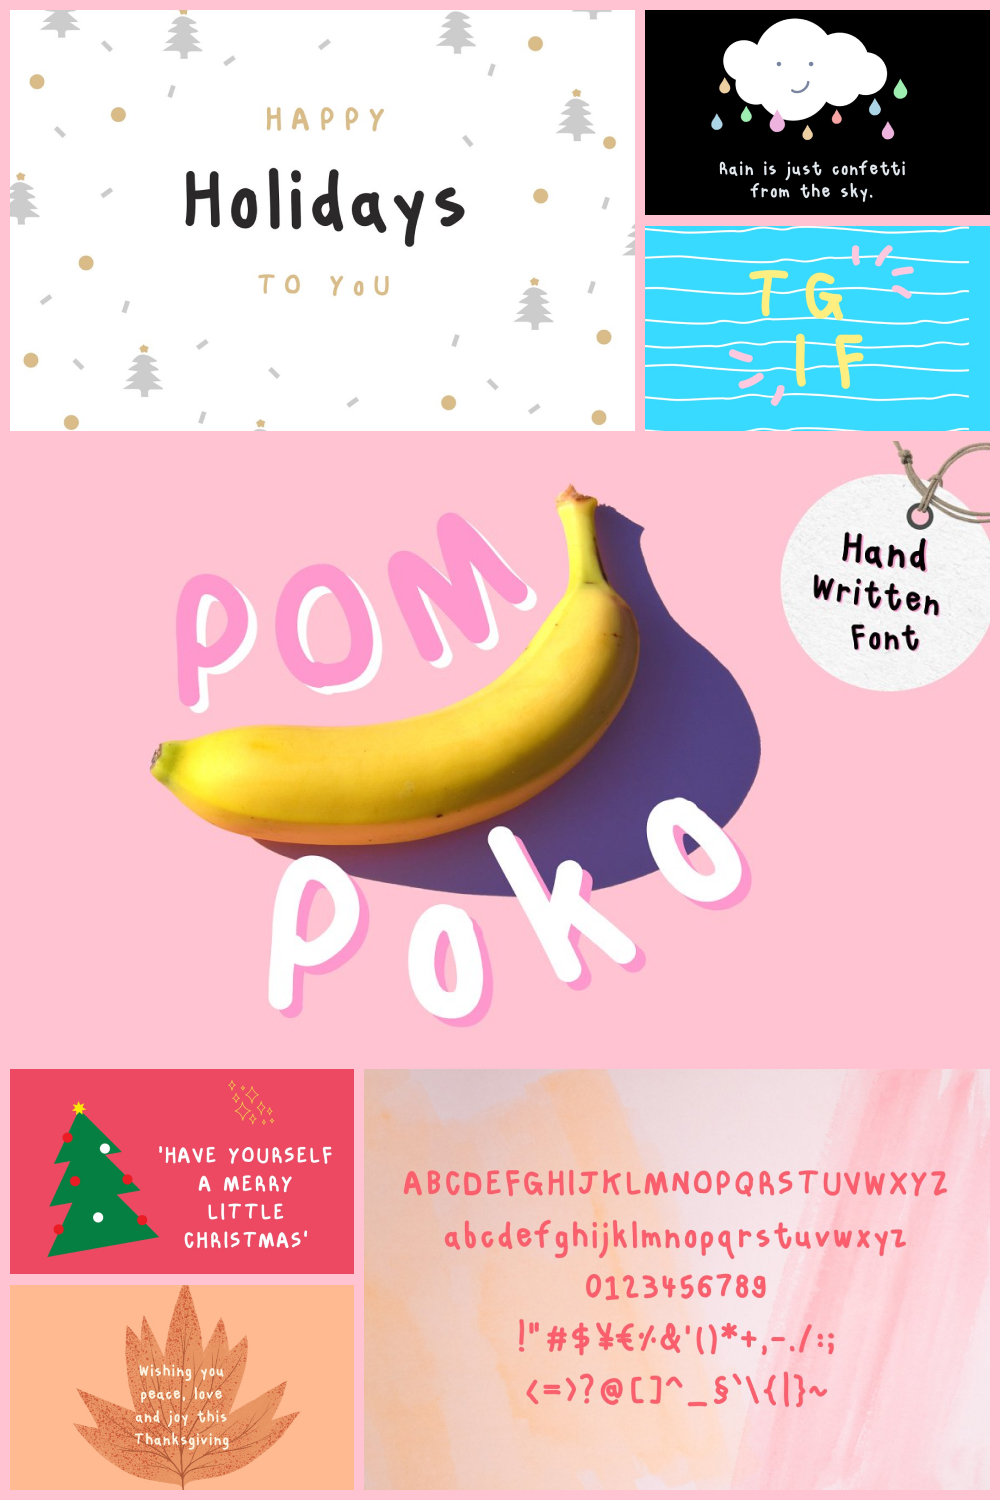 Cheerful font on colorful cards.